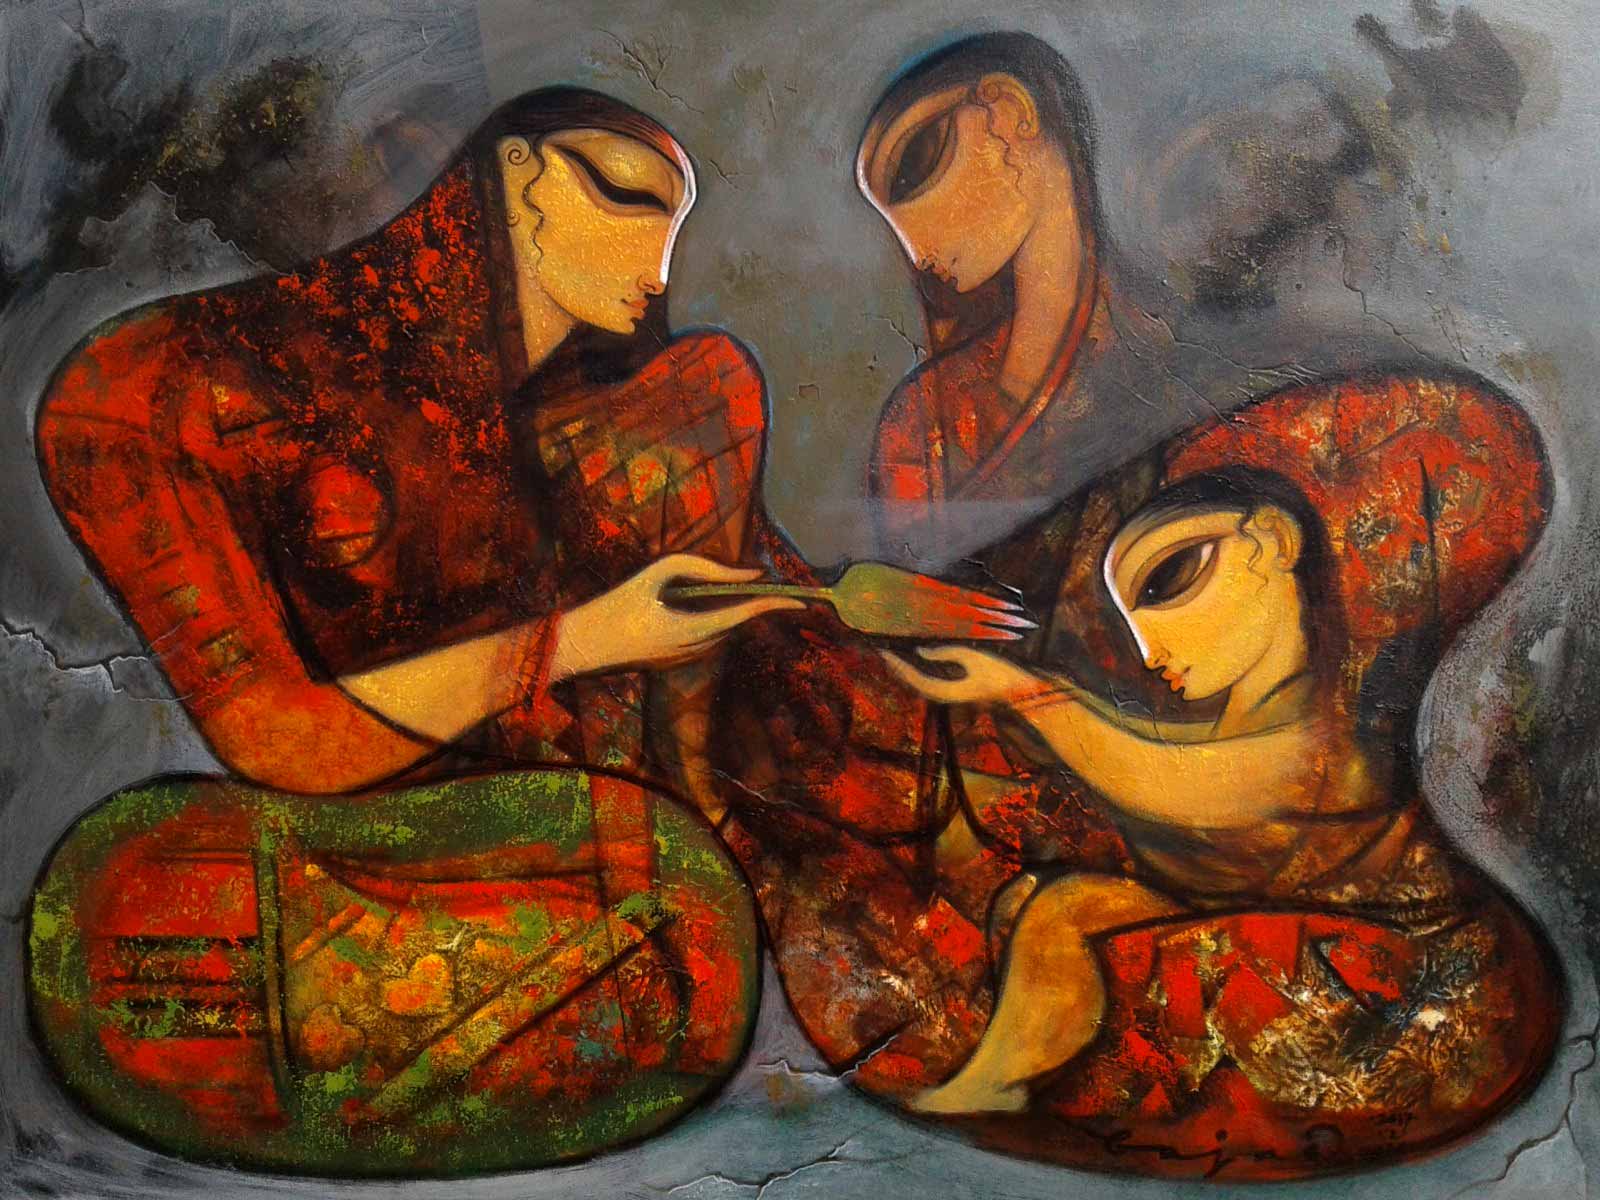 Figurative Painting with Acrylic on Canvas "Gifting Love" art by Ramesh P Gujar